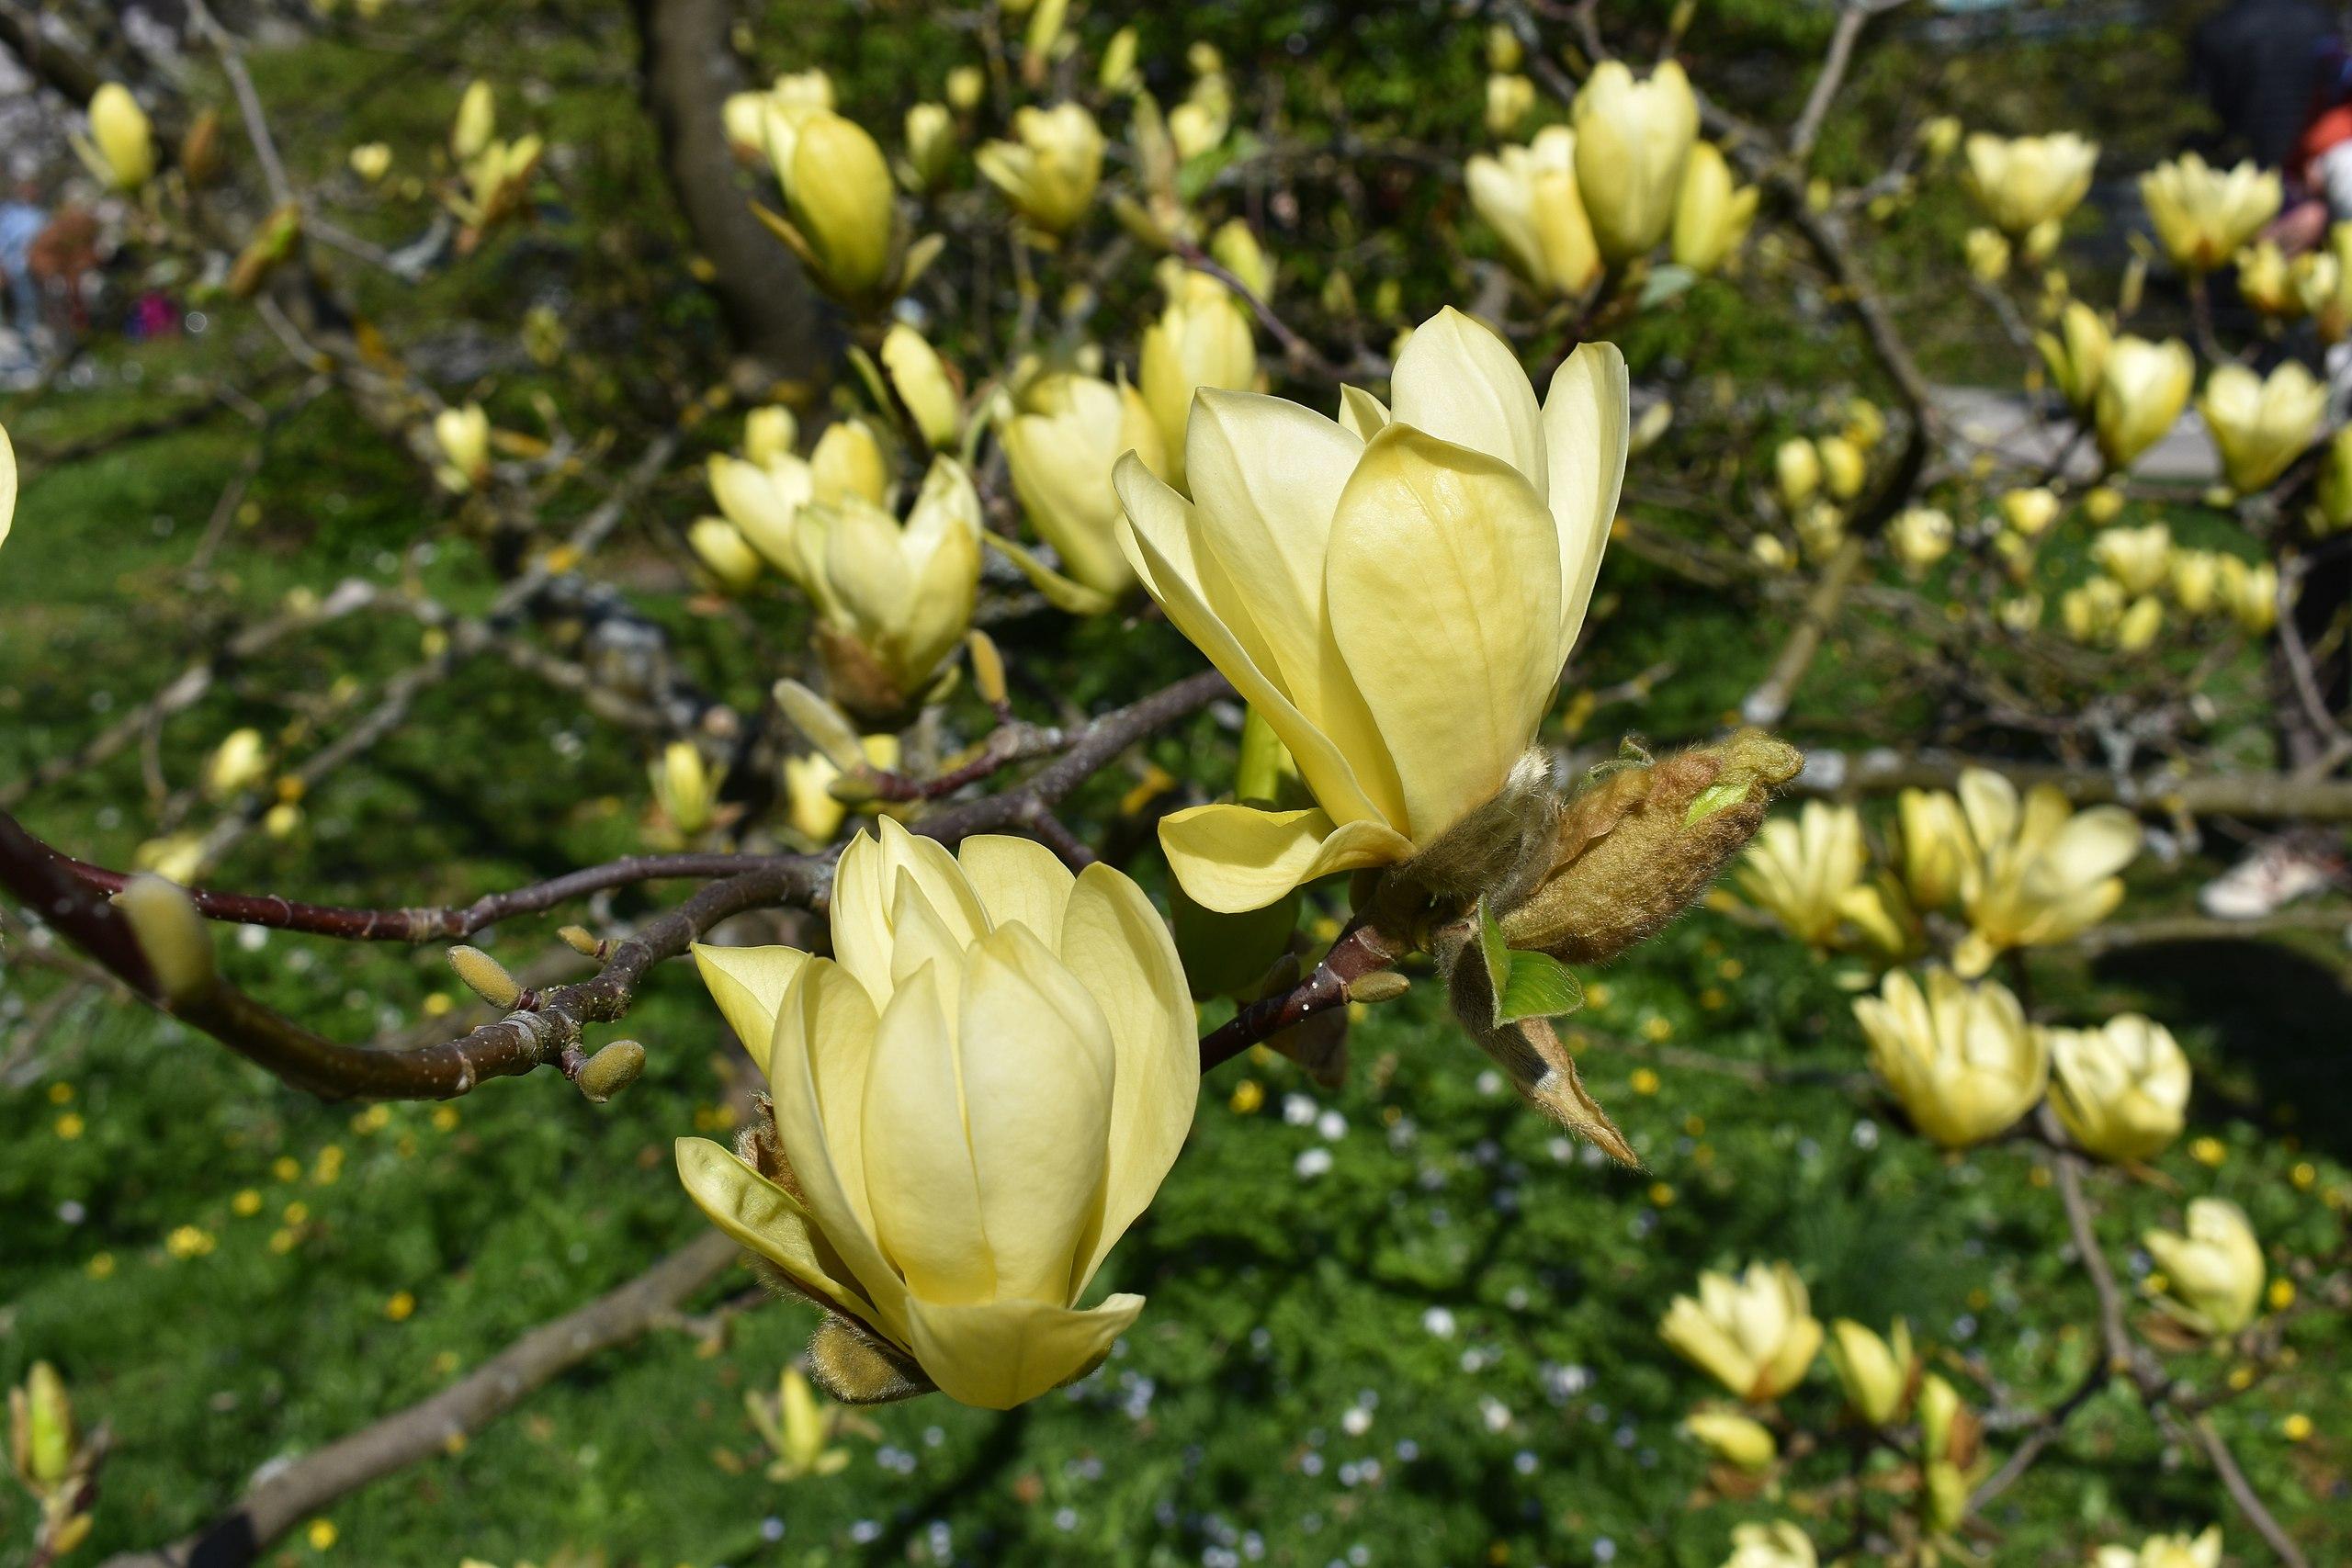 yellow flowers with brown buds, green foliage and brown branches